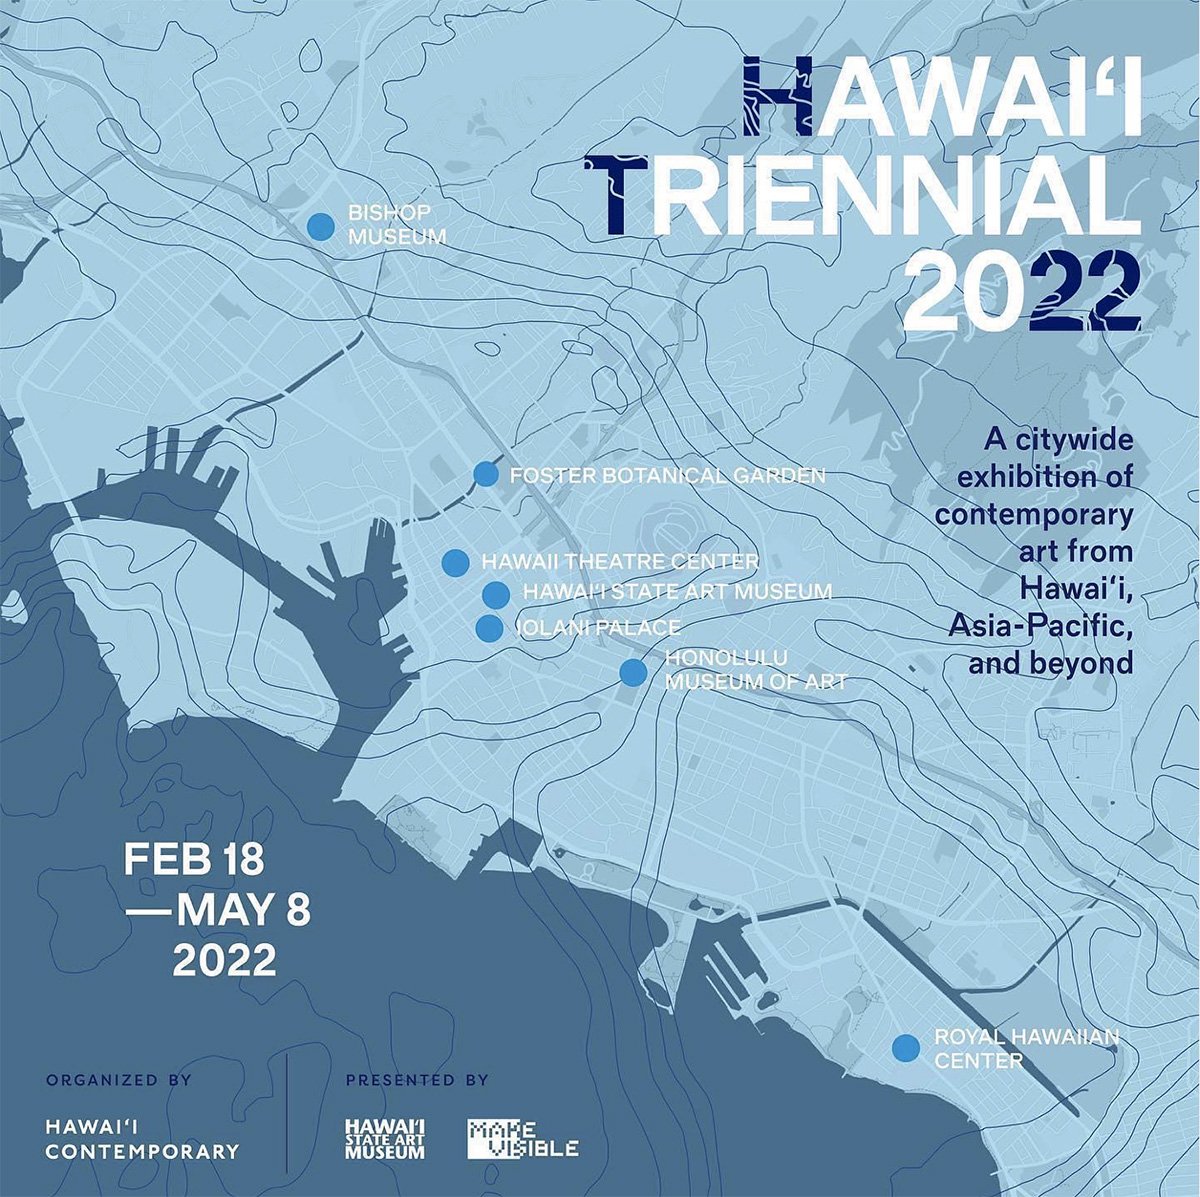   HAWAII TRIENNIAL 2022   2022.2.18-2022.5.8   Hawai‘i Triennial 2022 (HT22) is a multi-site exhibition of contemporary art from Hawai‘i, Asia-Pacific, and beyond. Installed across seven sites of exhibition on the Hawaiian Island of O‘ahu, HT22 will 